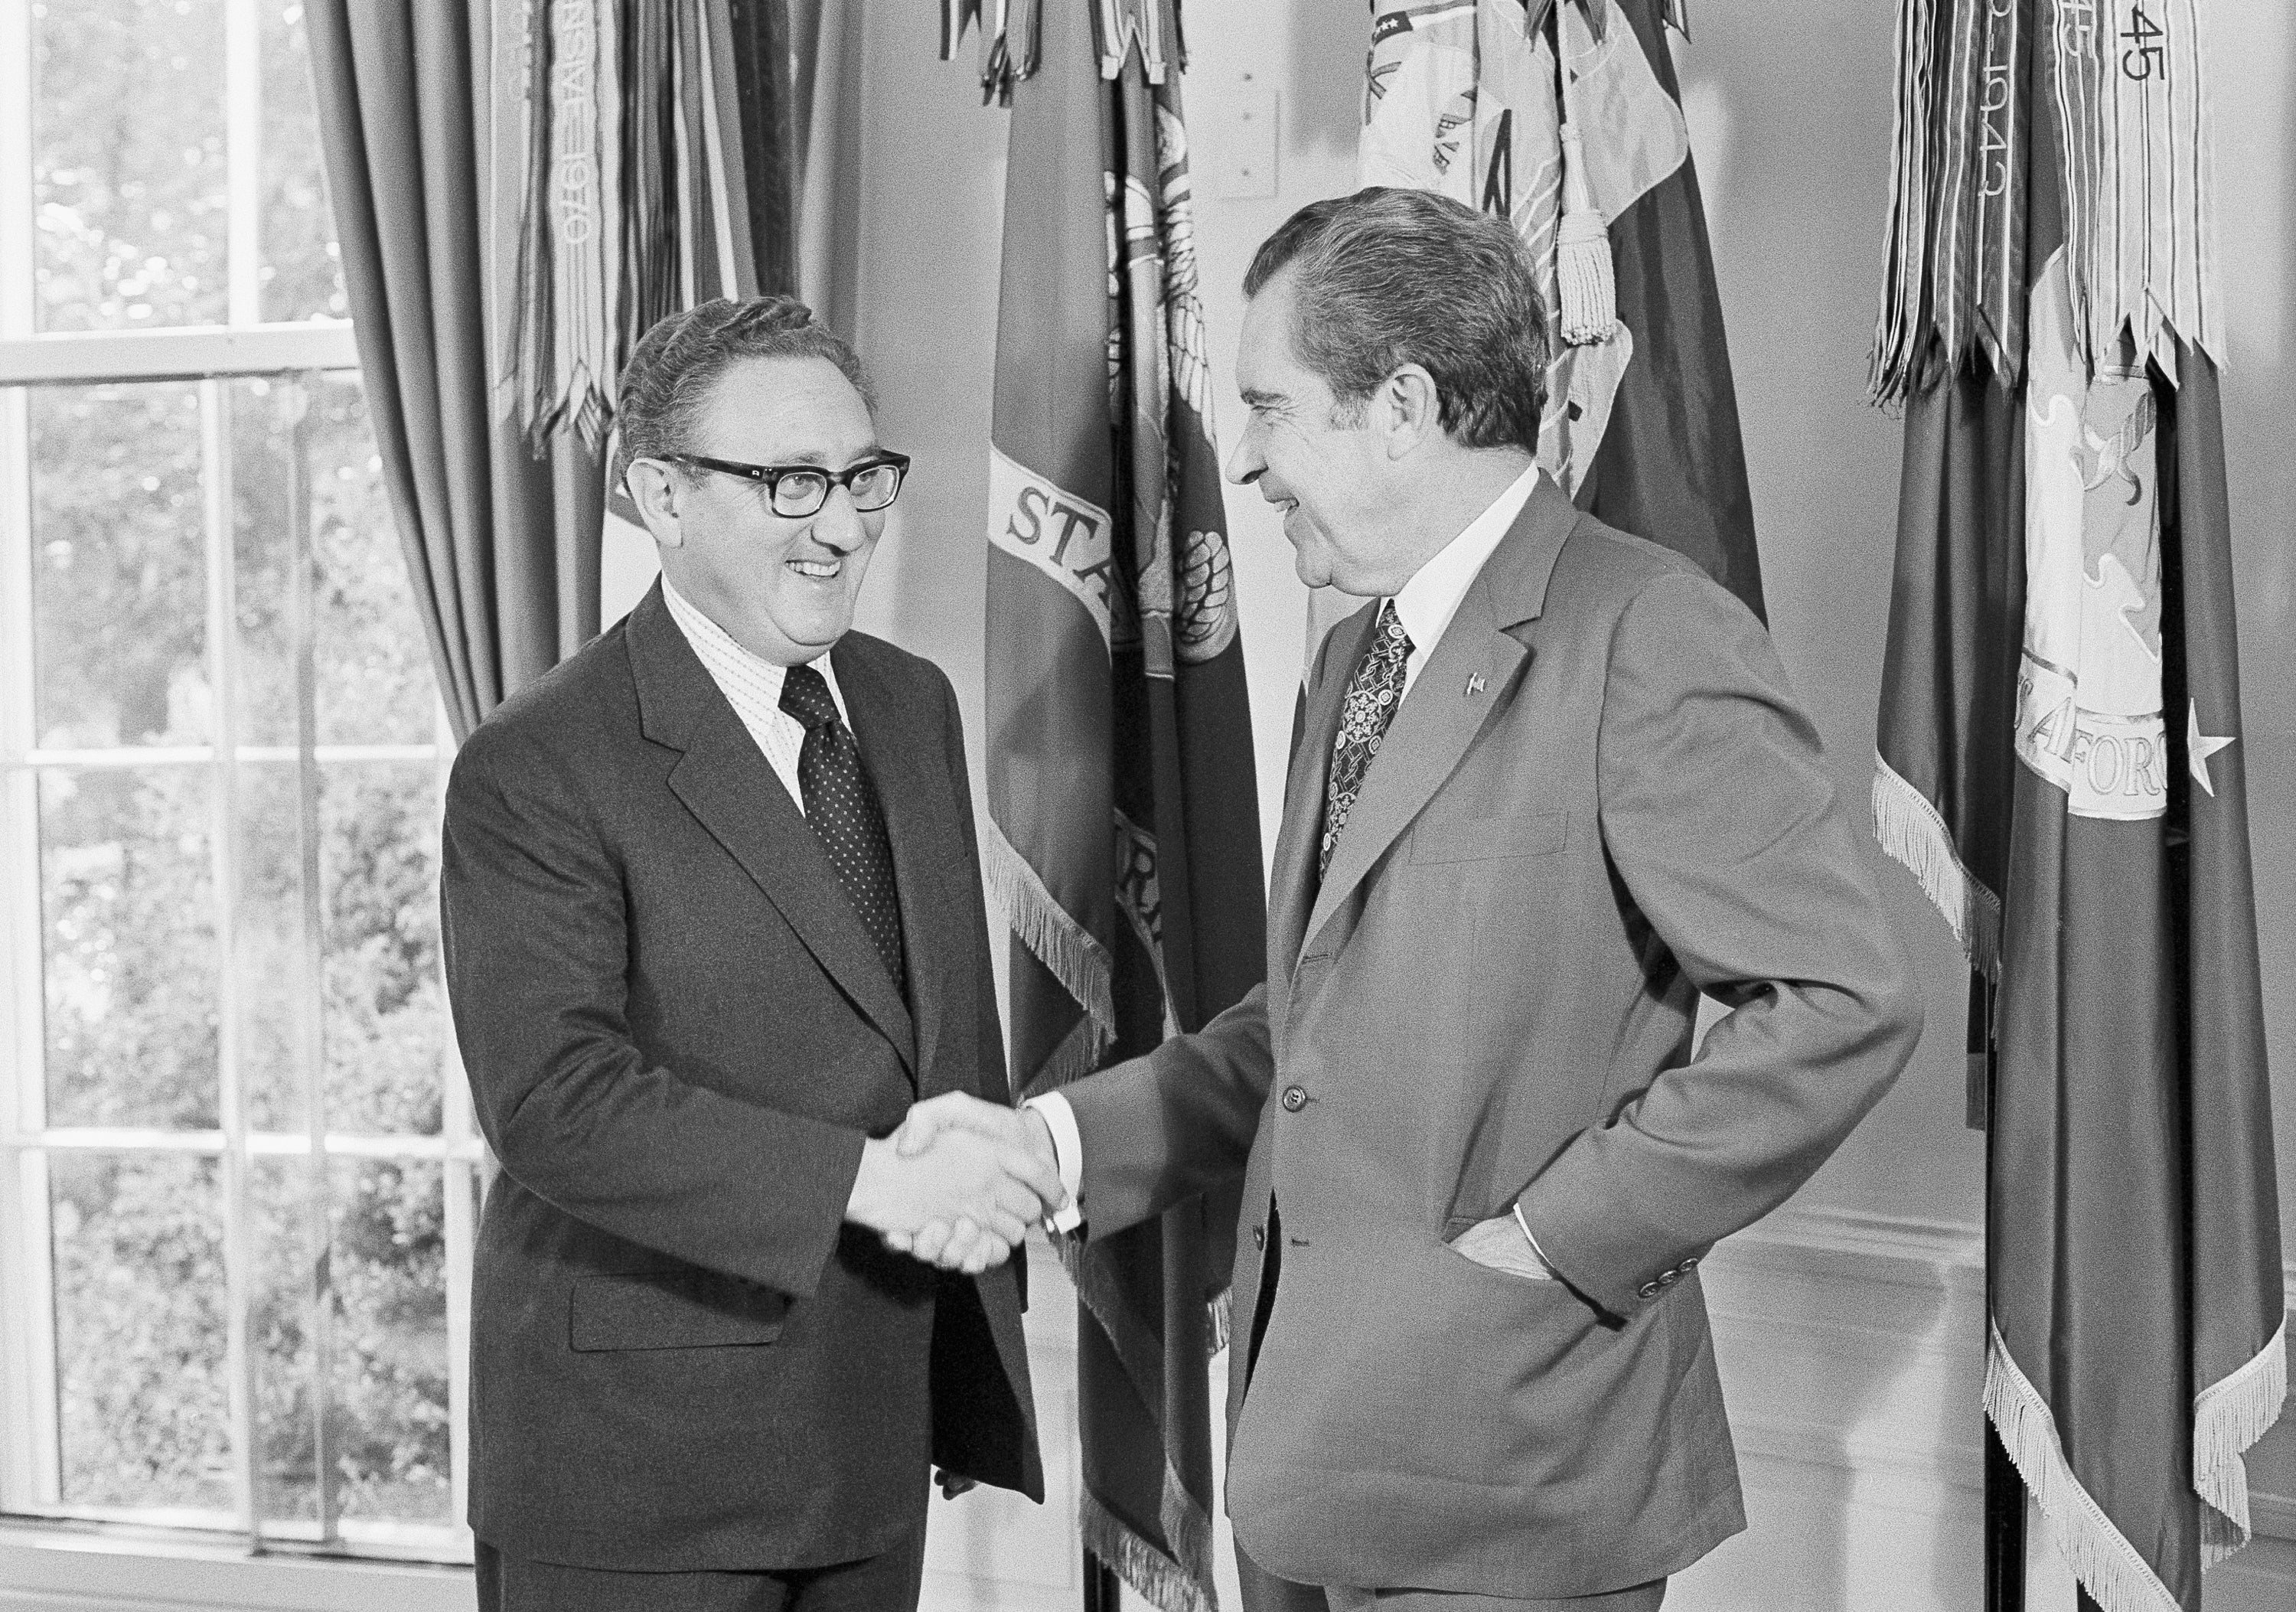 President Richard Nixon offers his congratulations to Secretary of State Henry Kissinger on Kissinger’s receiving the 1973 Nobel Peace Prize